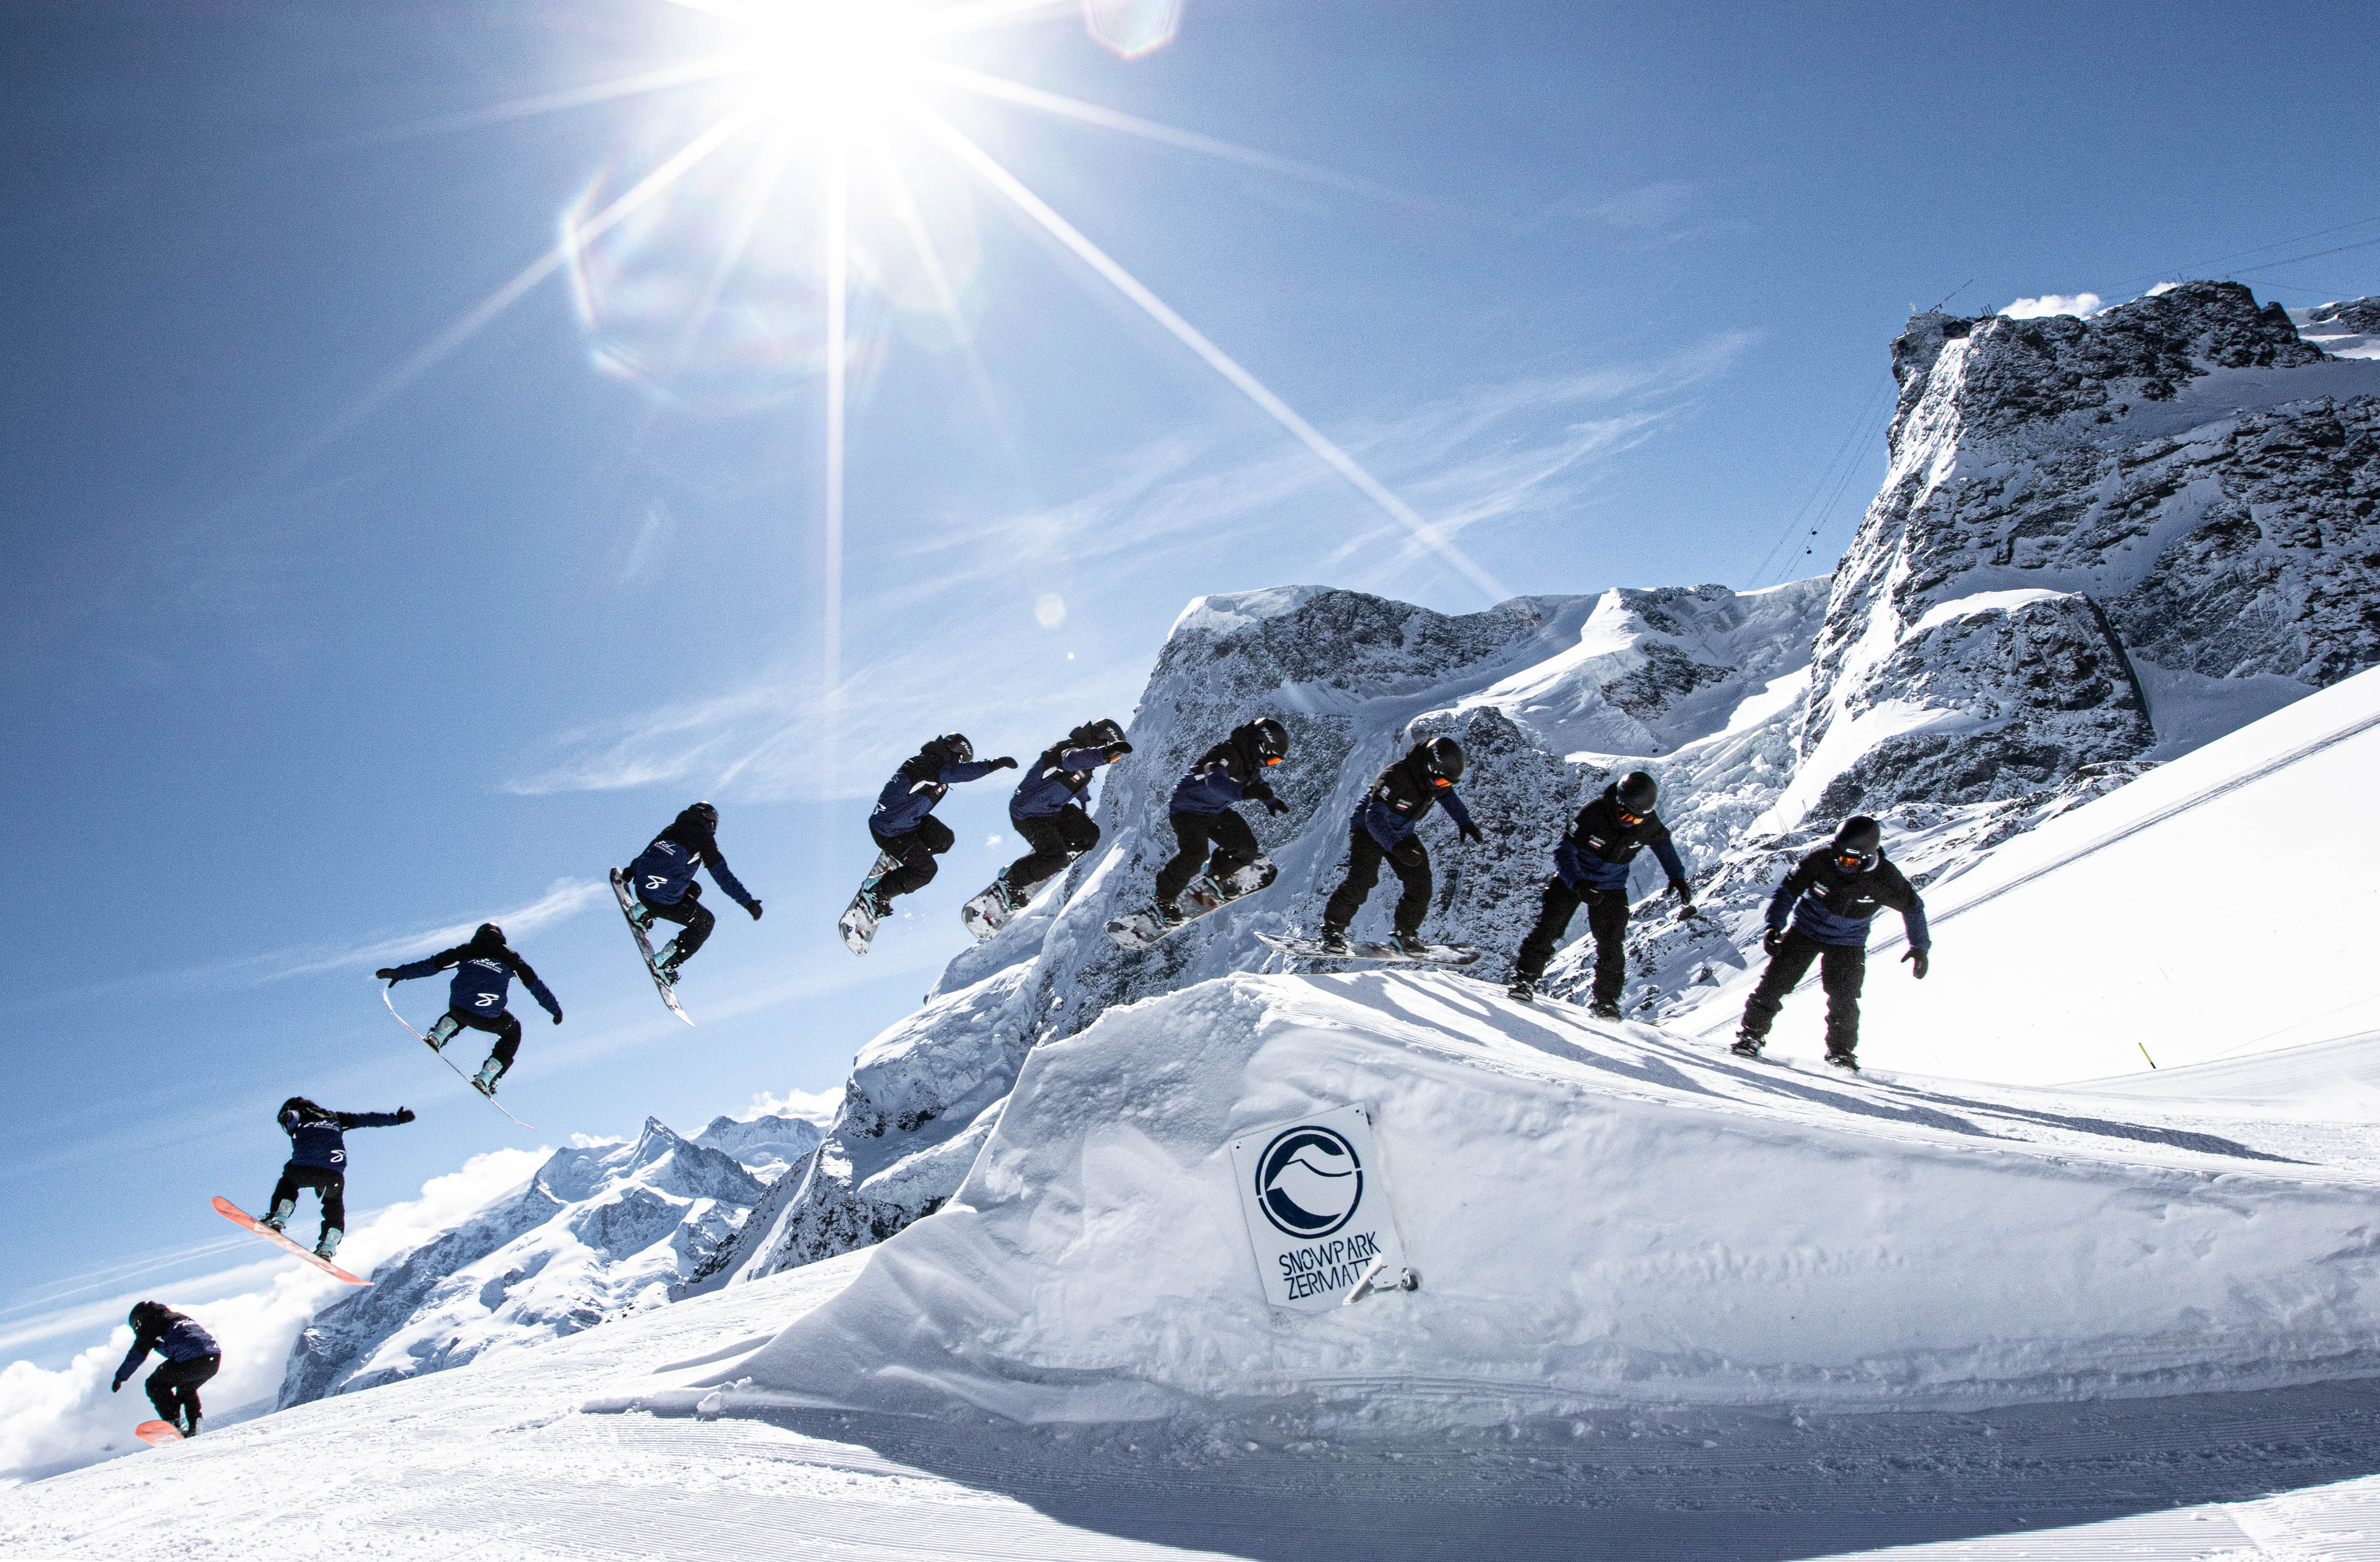 private snowboard lessons for adults in Zermatt